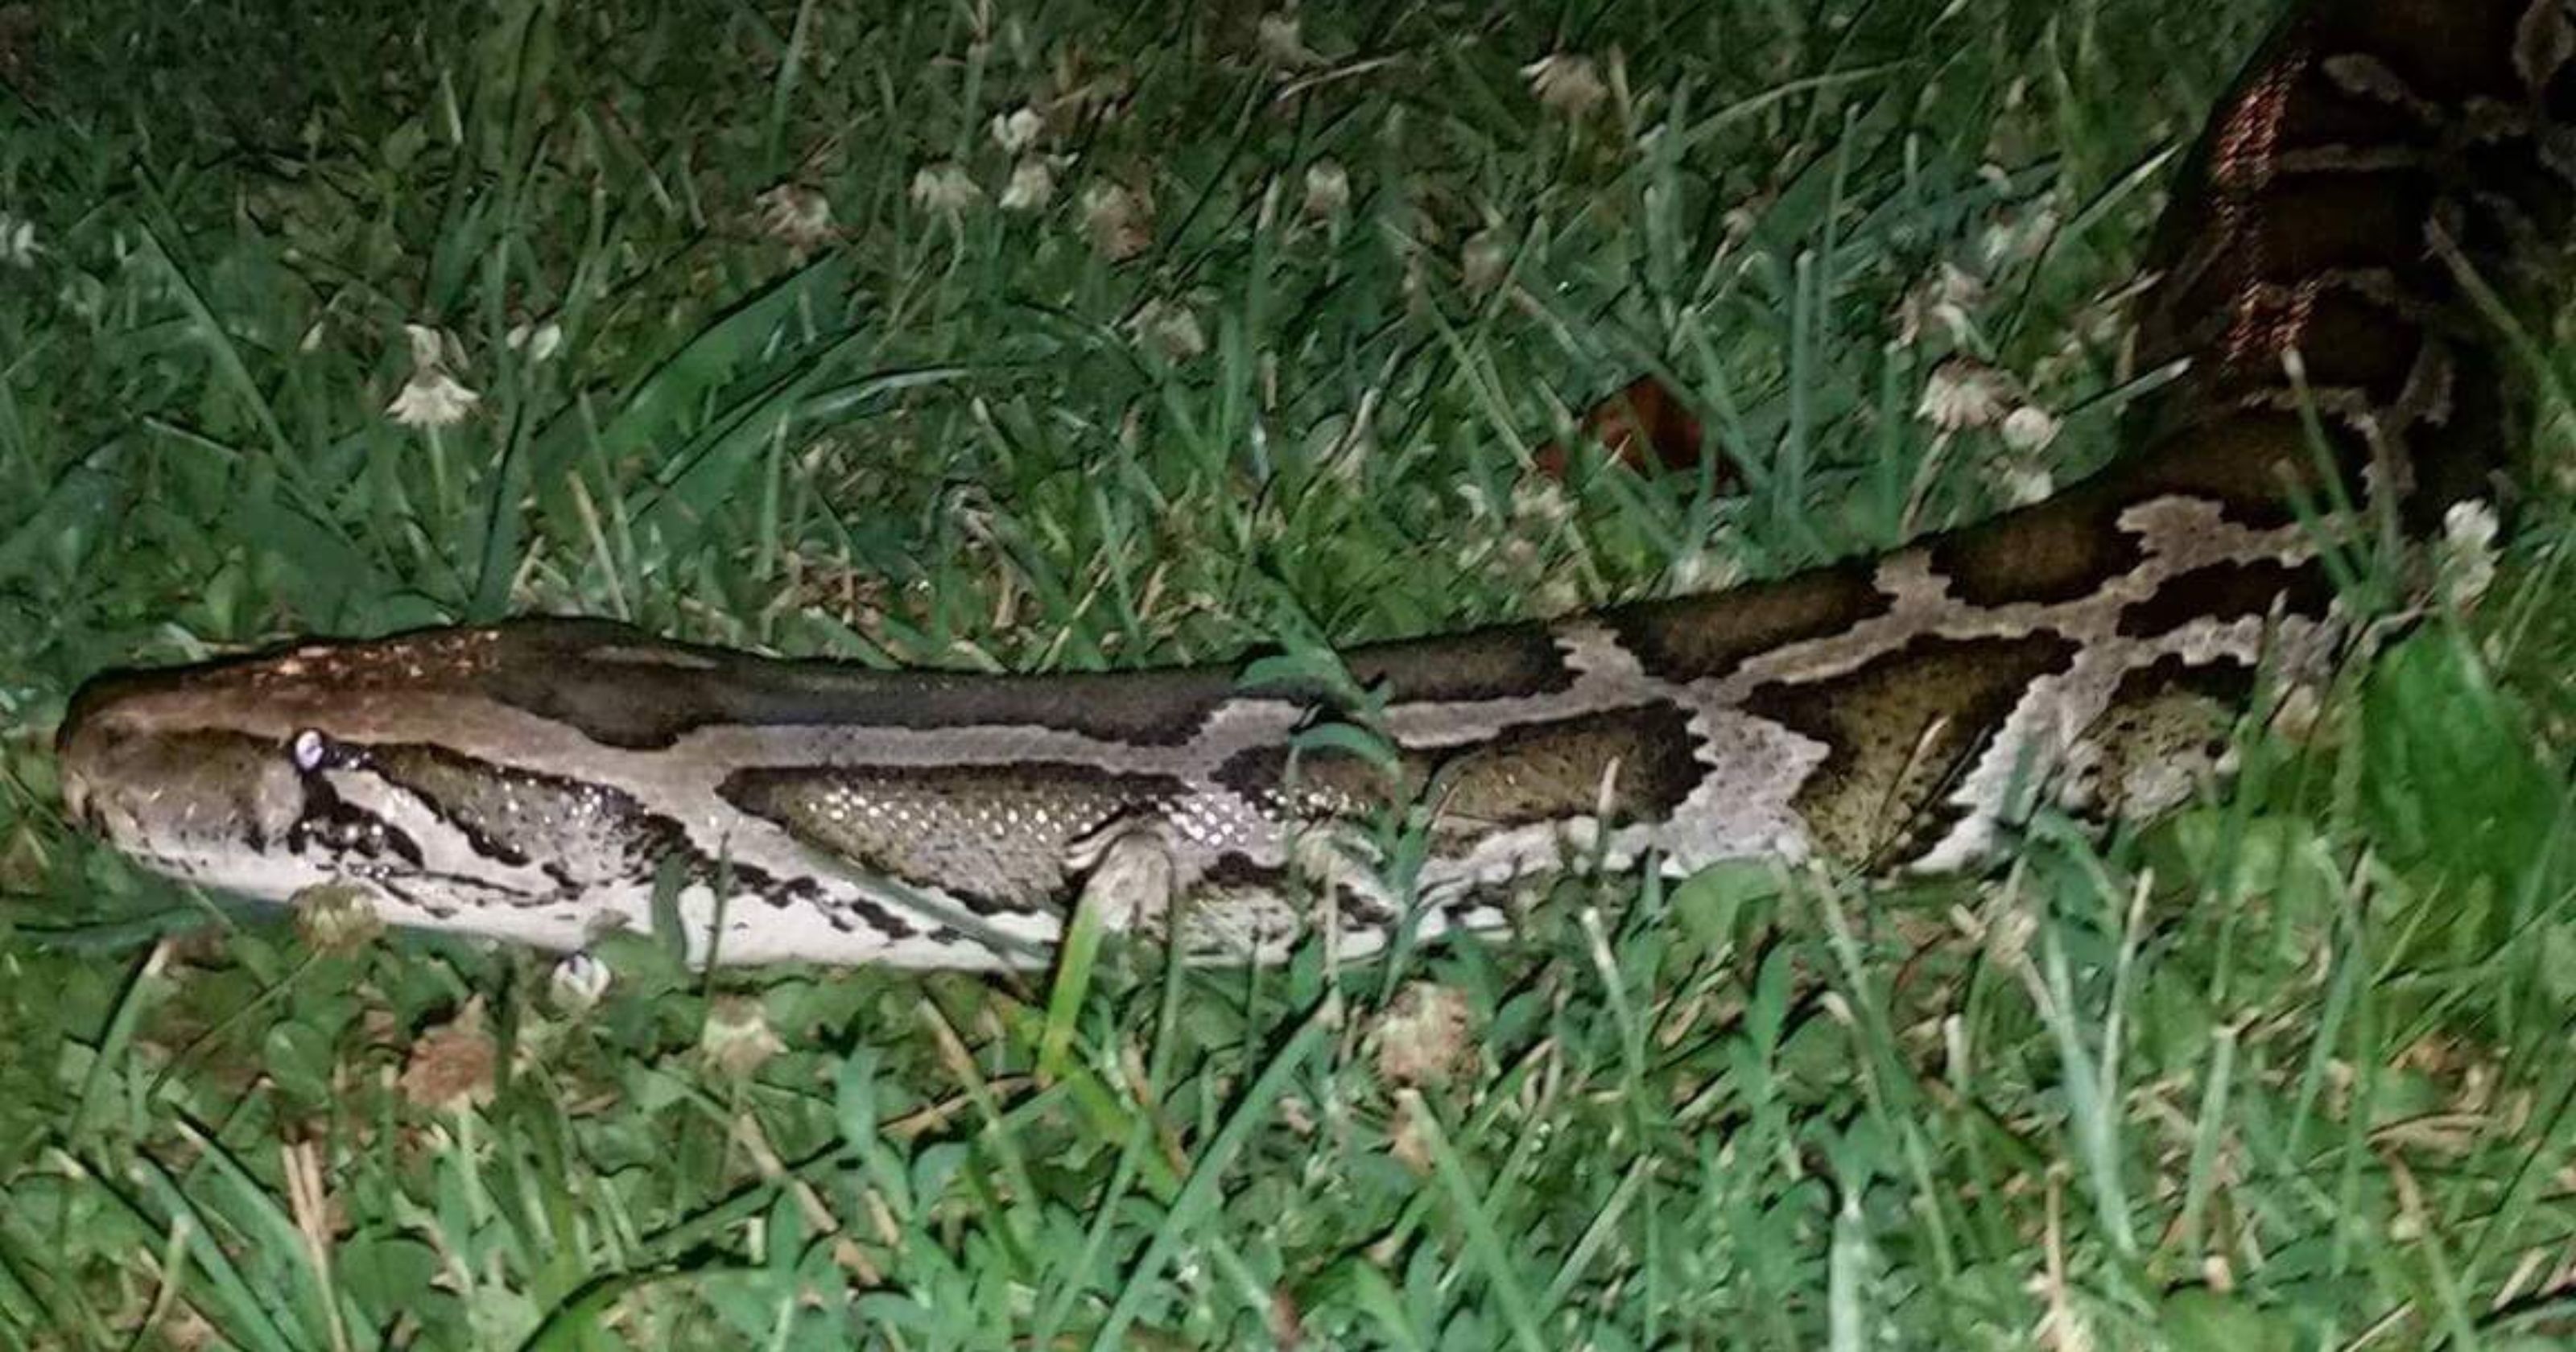 20-foot pet python found alive near owner's house two months after ...